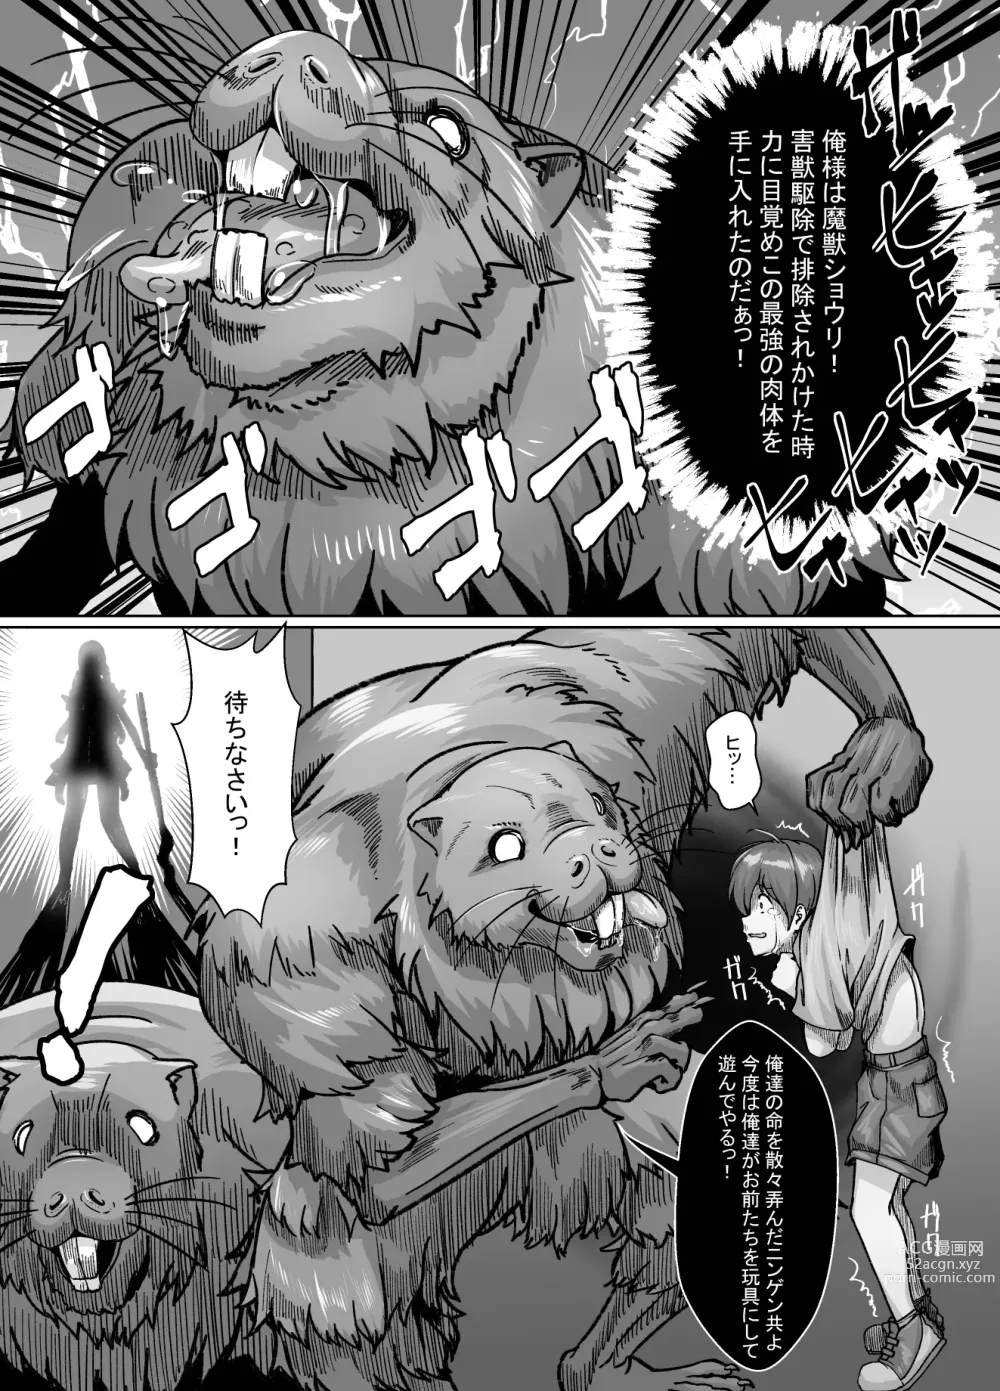 Page 3 of doujinshi Shes a weak little monster magical girl, but no matter how strong her opponent is, she'll never lose!